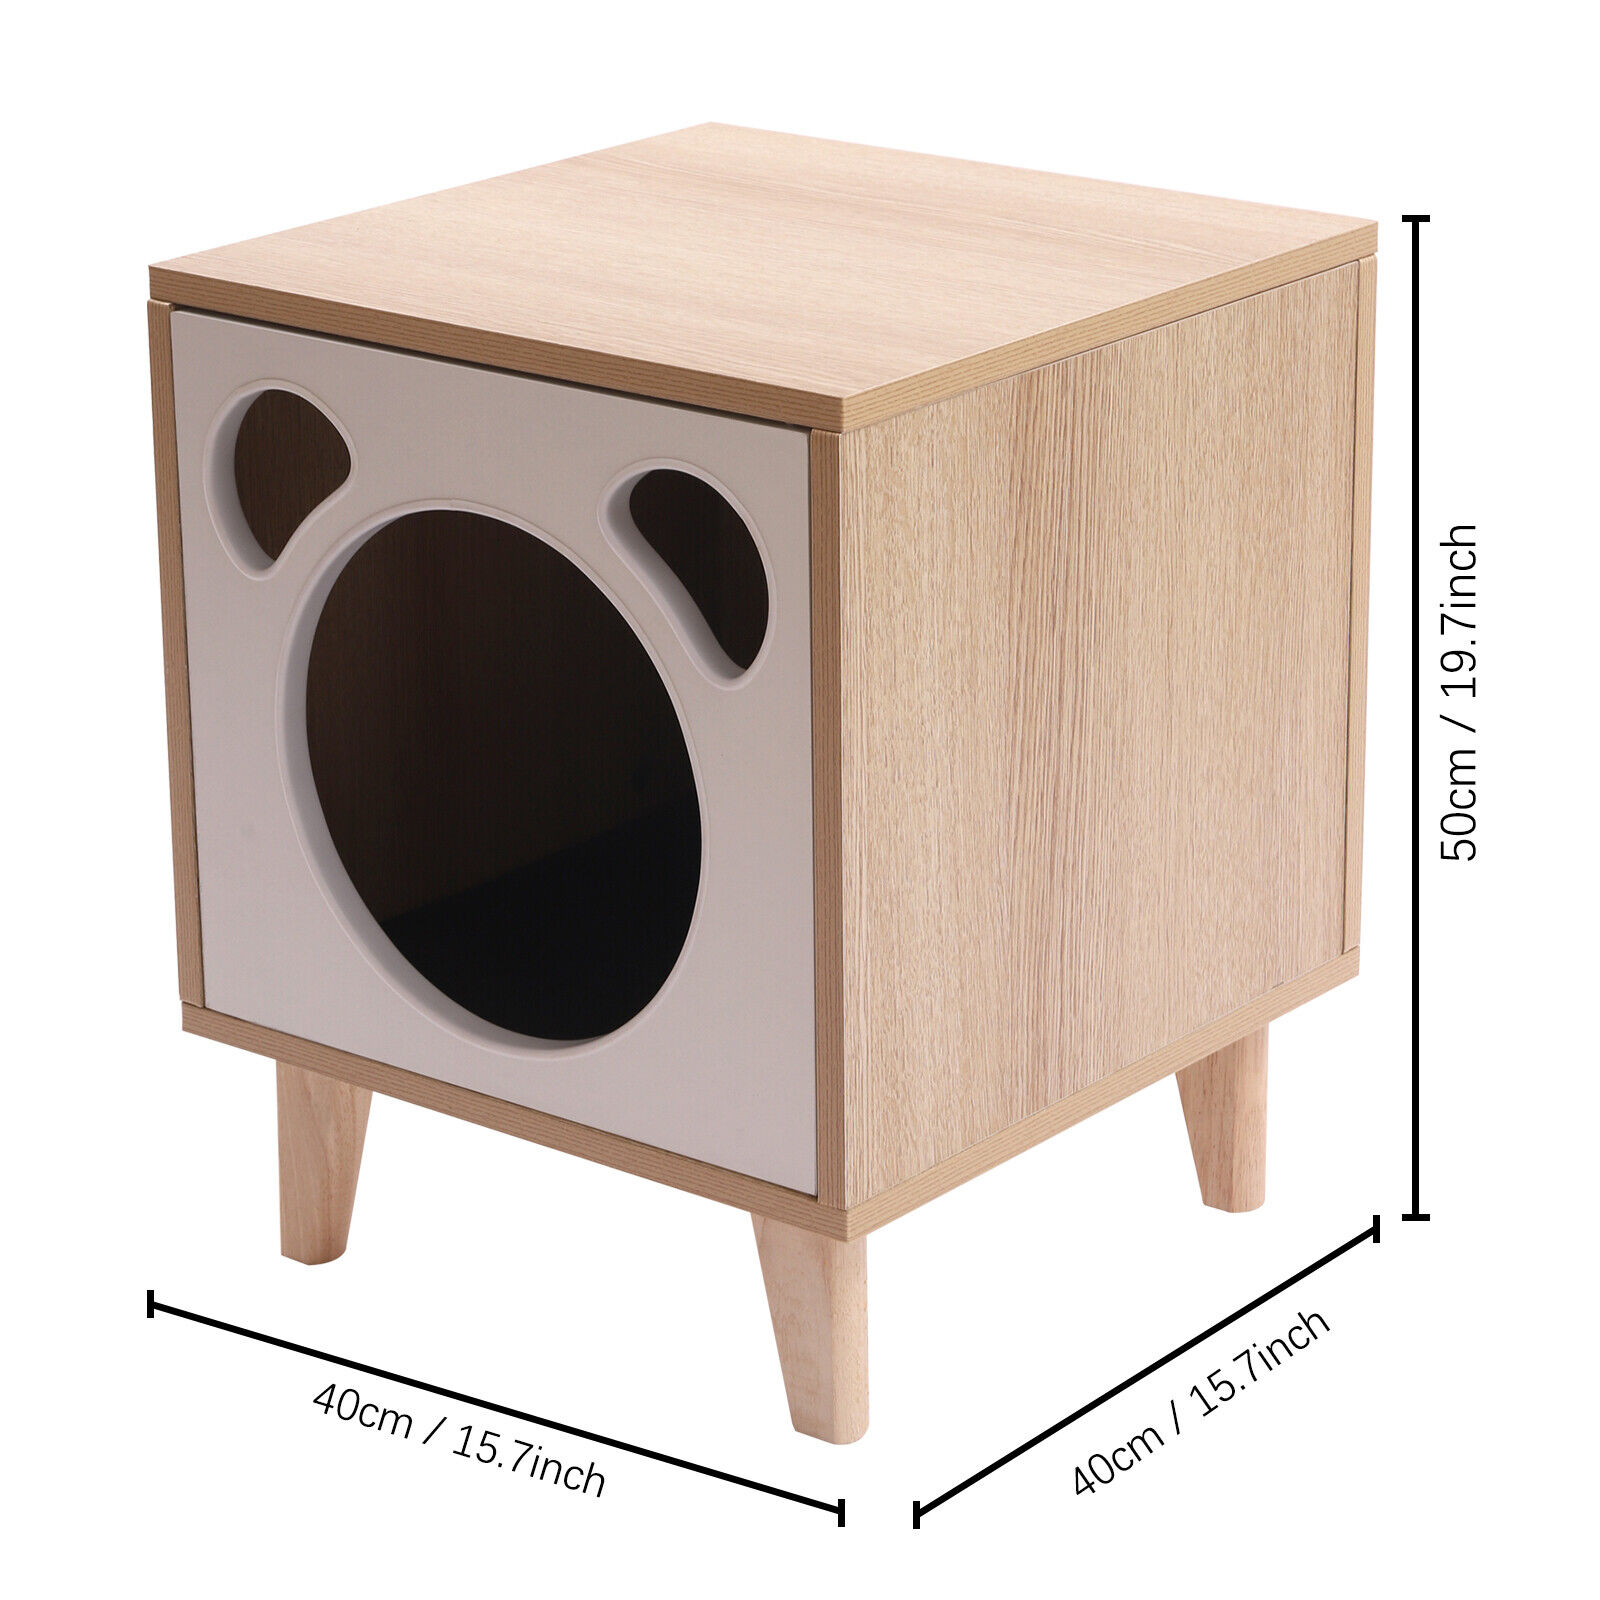 Wooden Nightstand Cat Bed Storage End Table Enclosure Bedside Organizer Modern Unbranded Does not apply - фотография #2